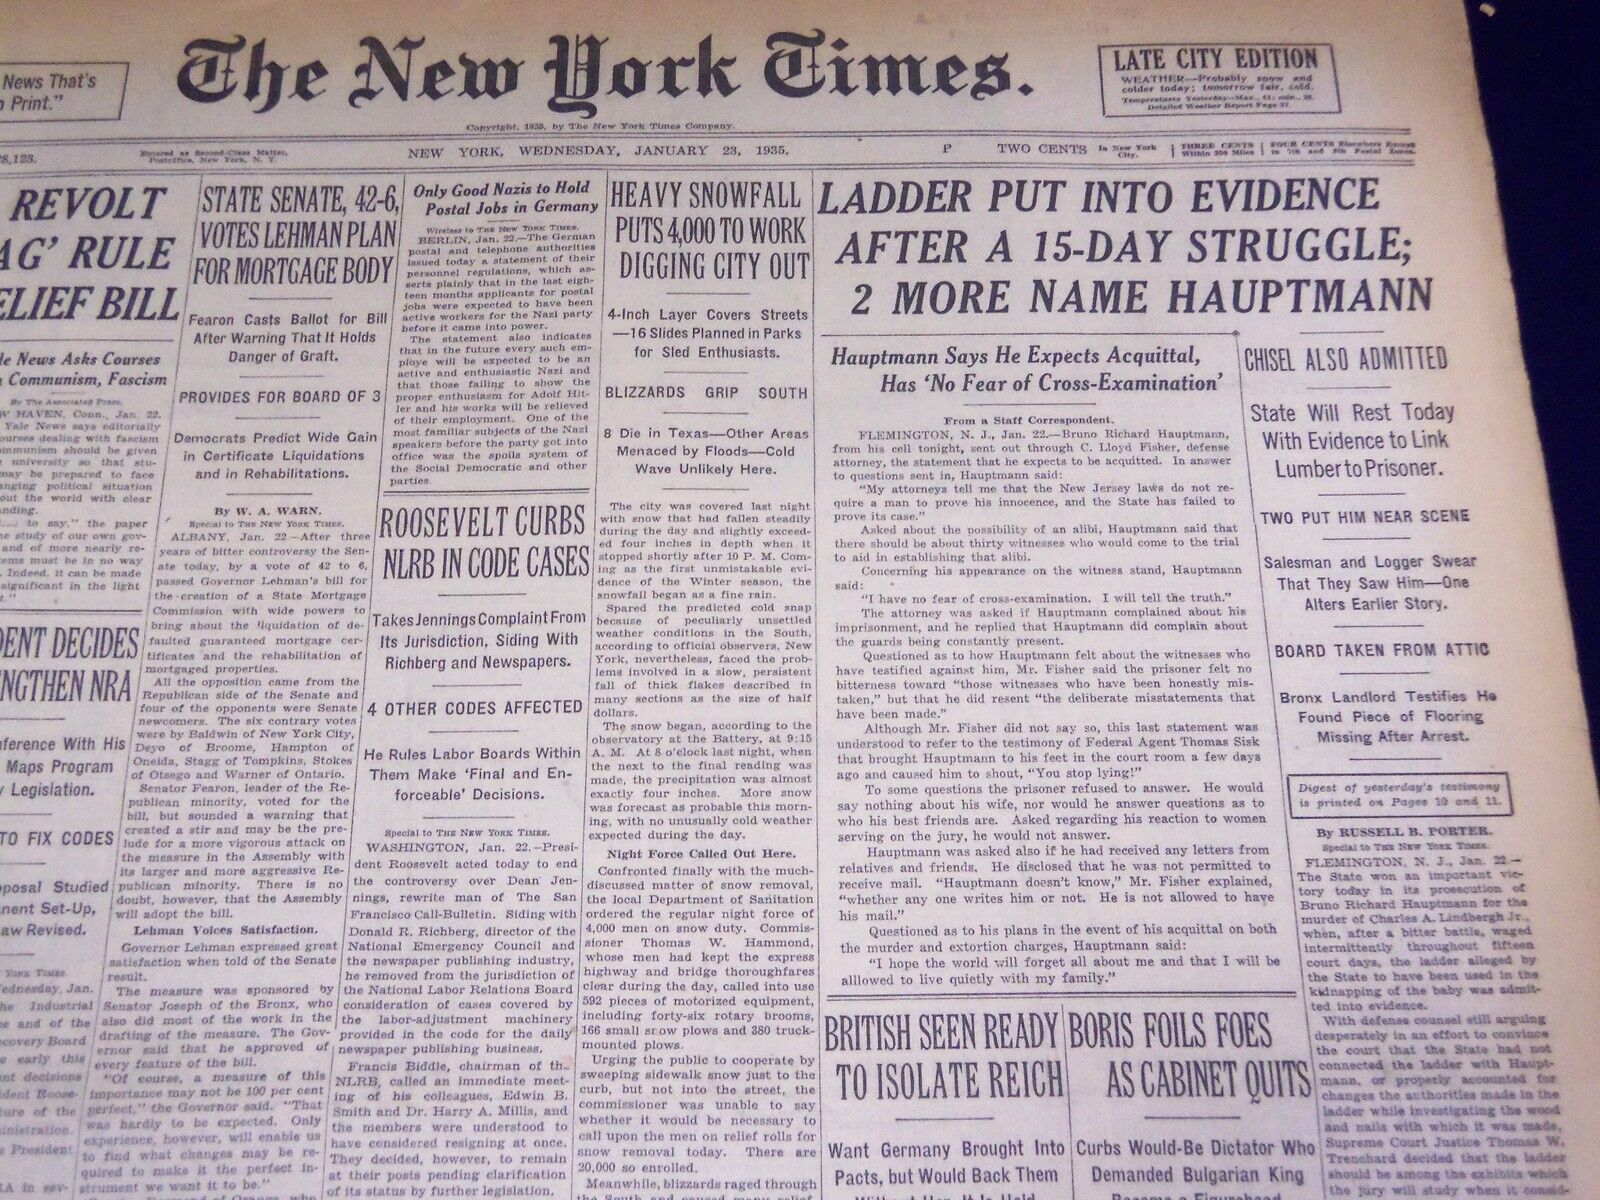 1935 JAN 23 NEW YORK TIMES - LADDER IN EVIDENCE AFTER 15 DAY STRUGGLE - NT 1953